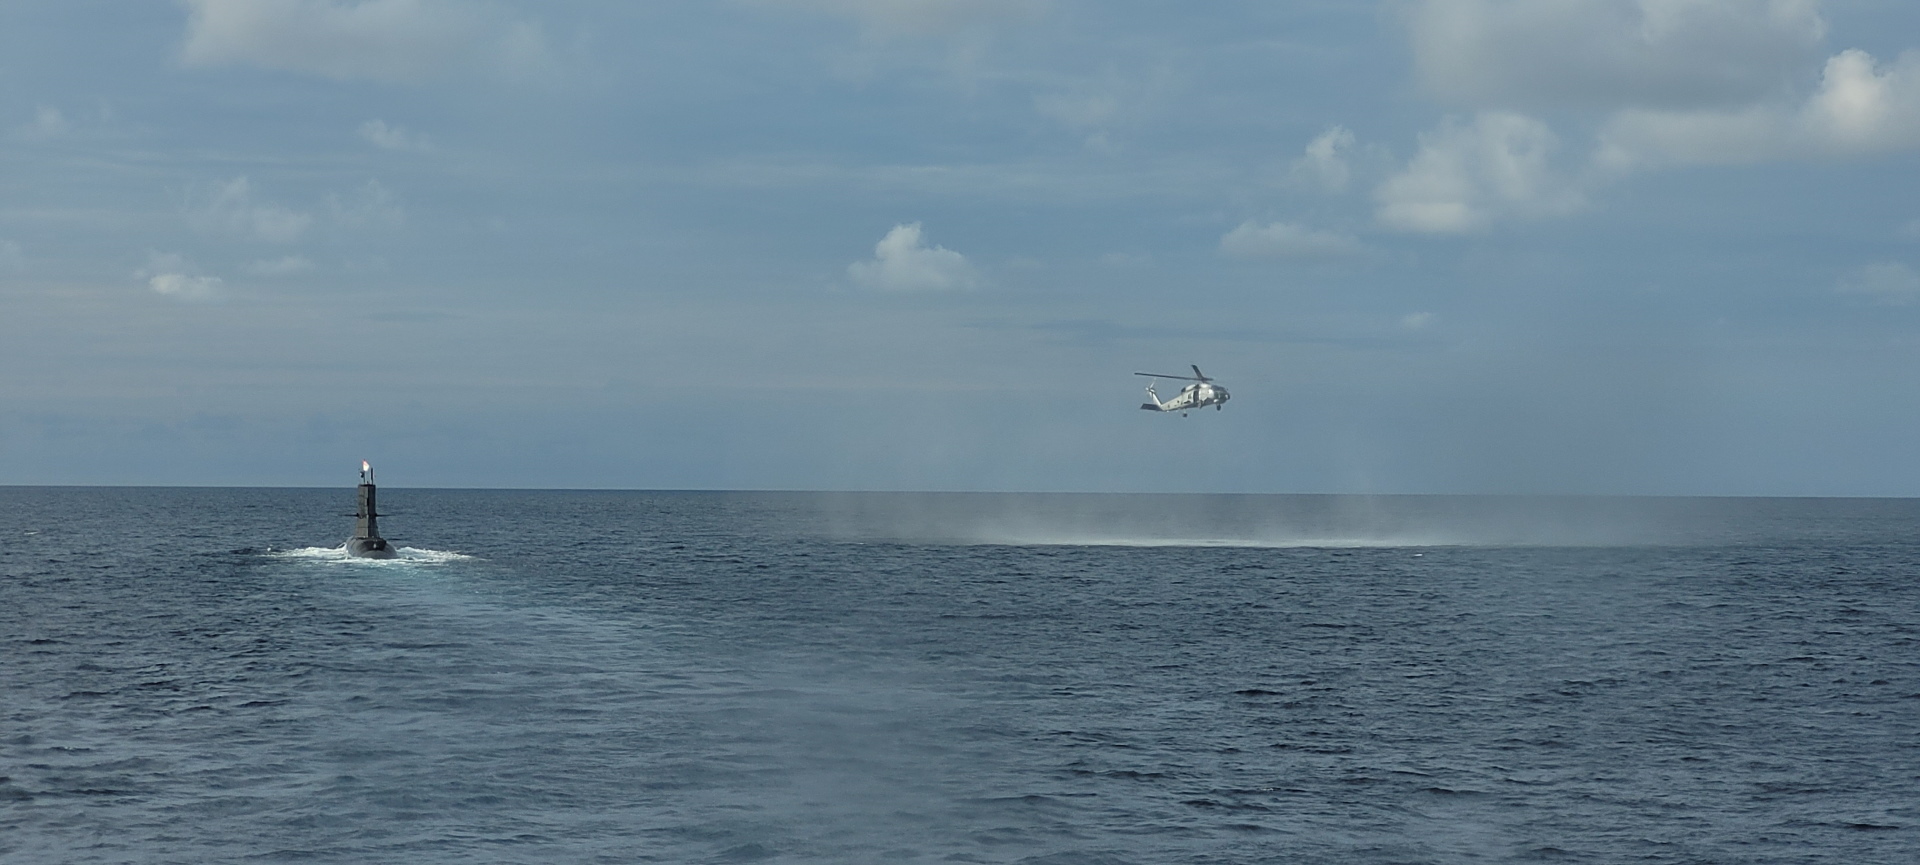 SIMBEX 2021 saw the participation of the RSN's S70B naval helicopter and submarine, together with the participating ships, in the conduct of naval serials against underwater threats.